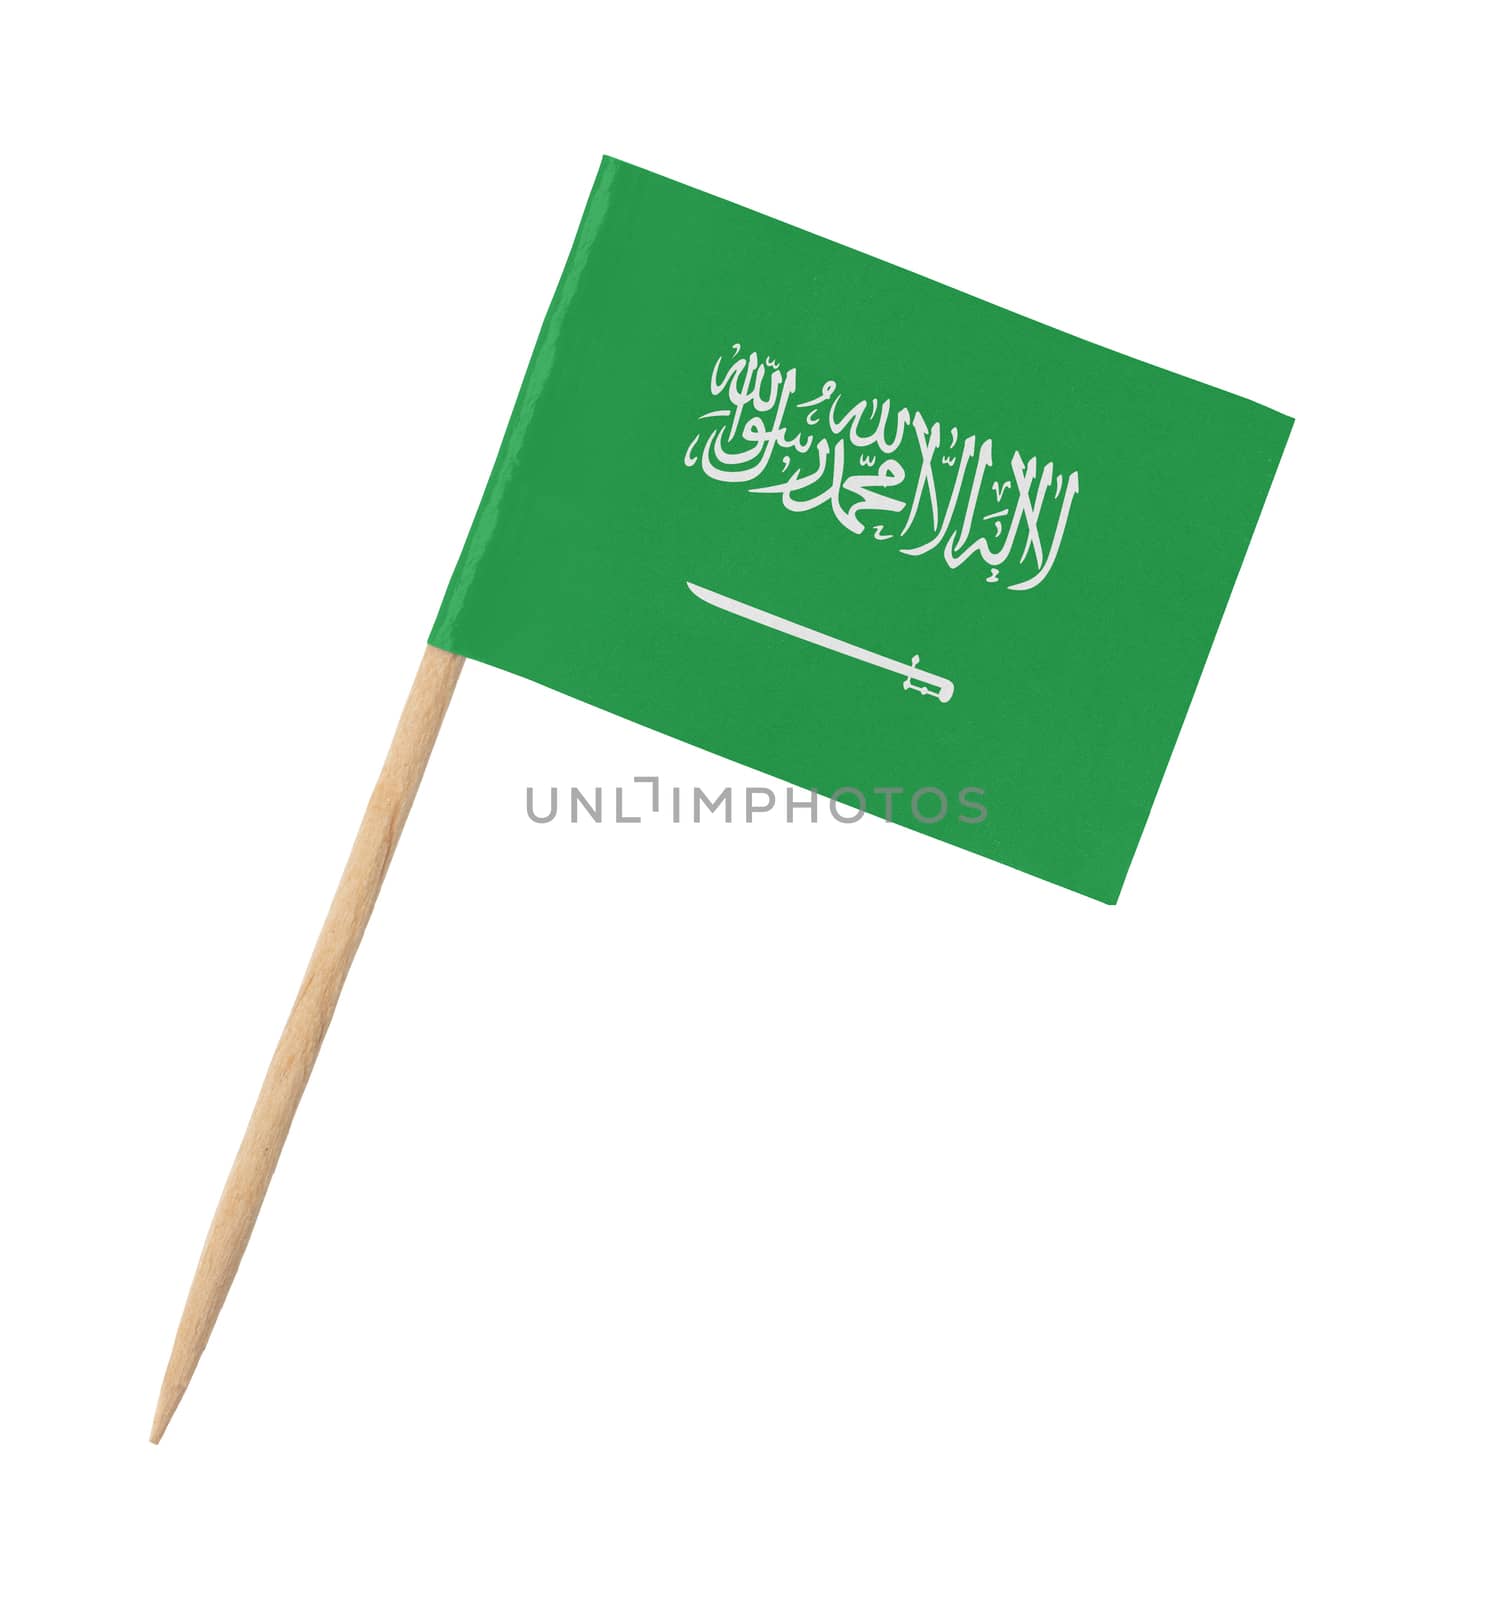 Small paper flag of Saudi Arabia on wooden stick by michaklootwijk